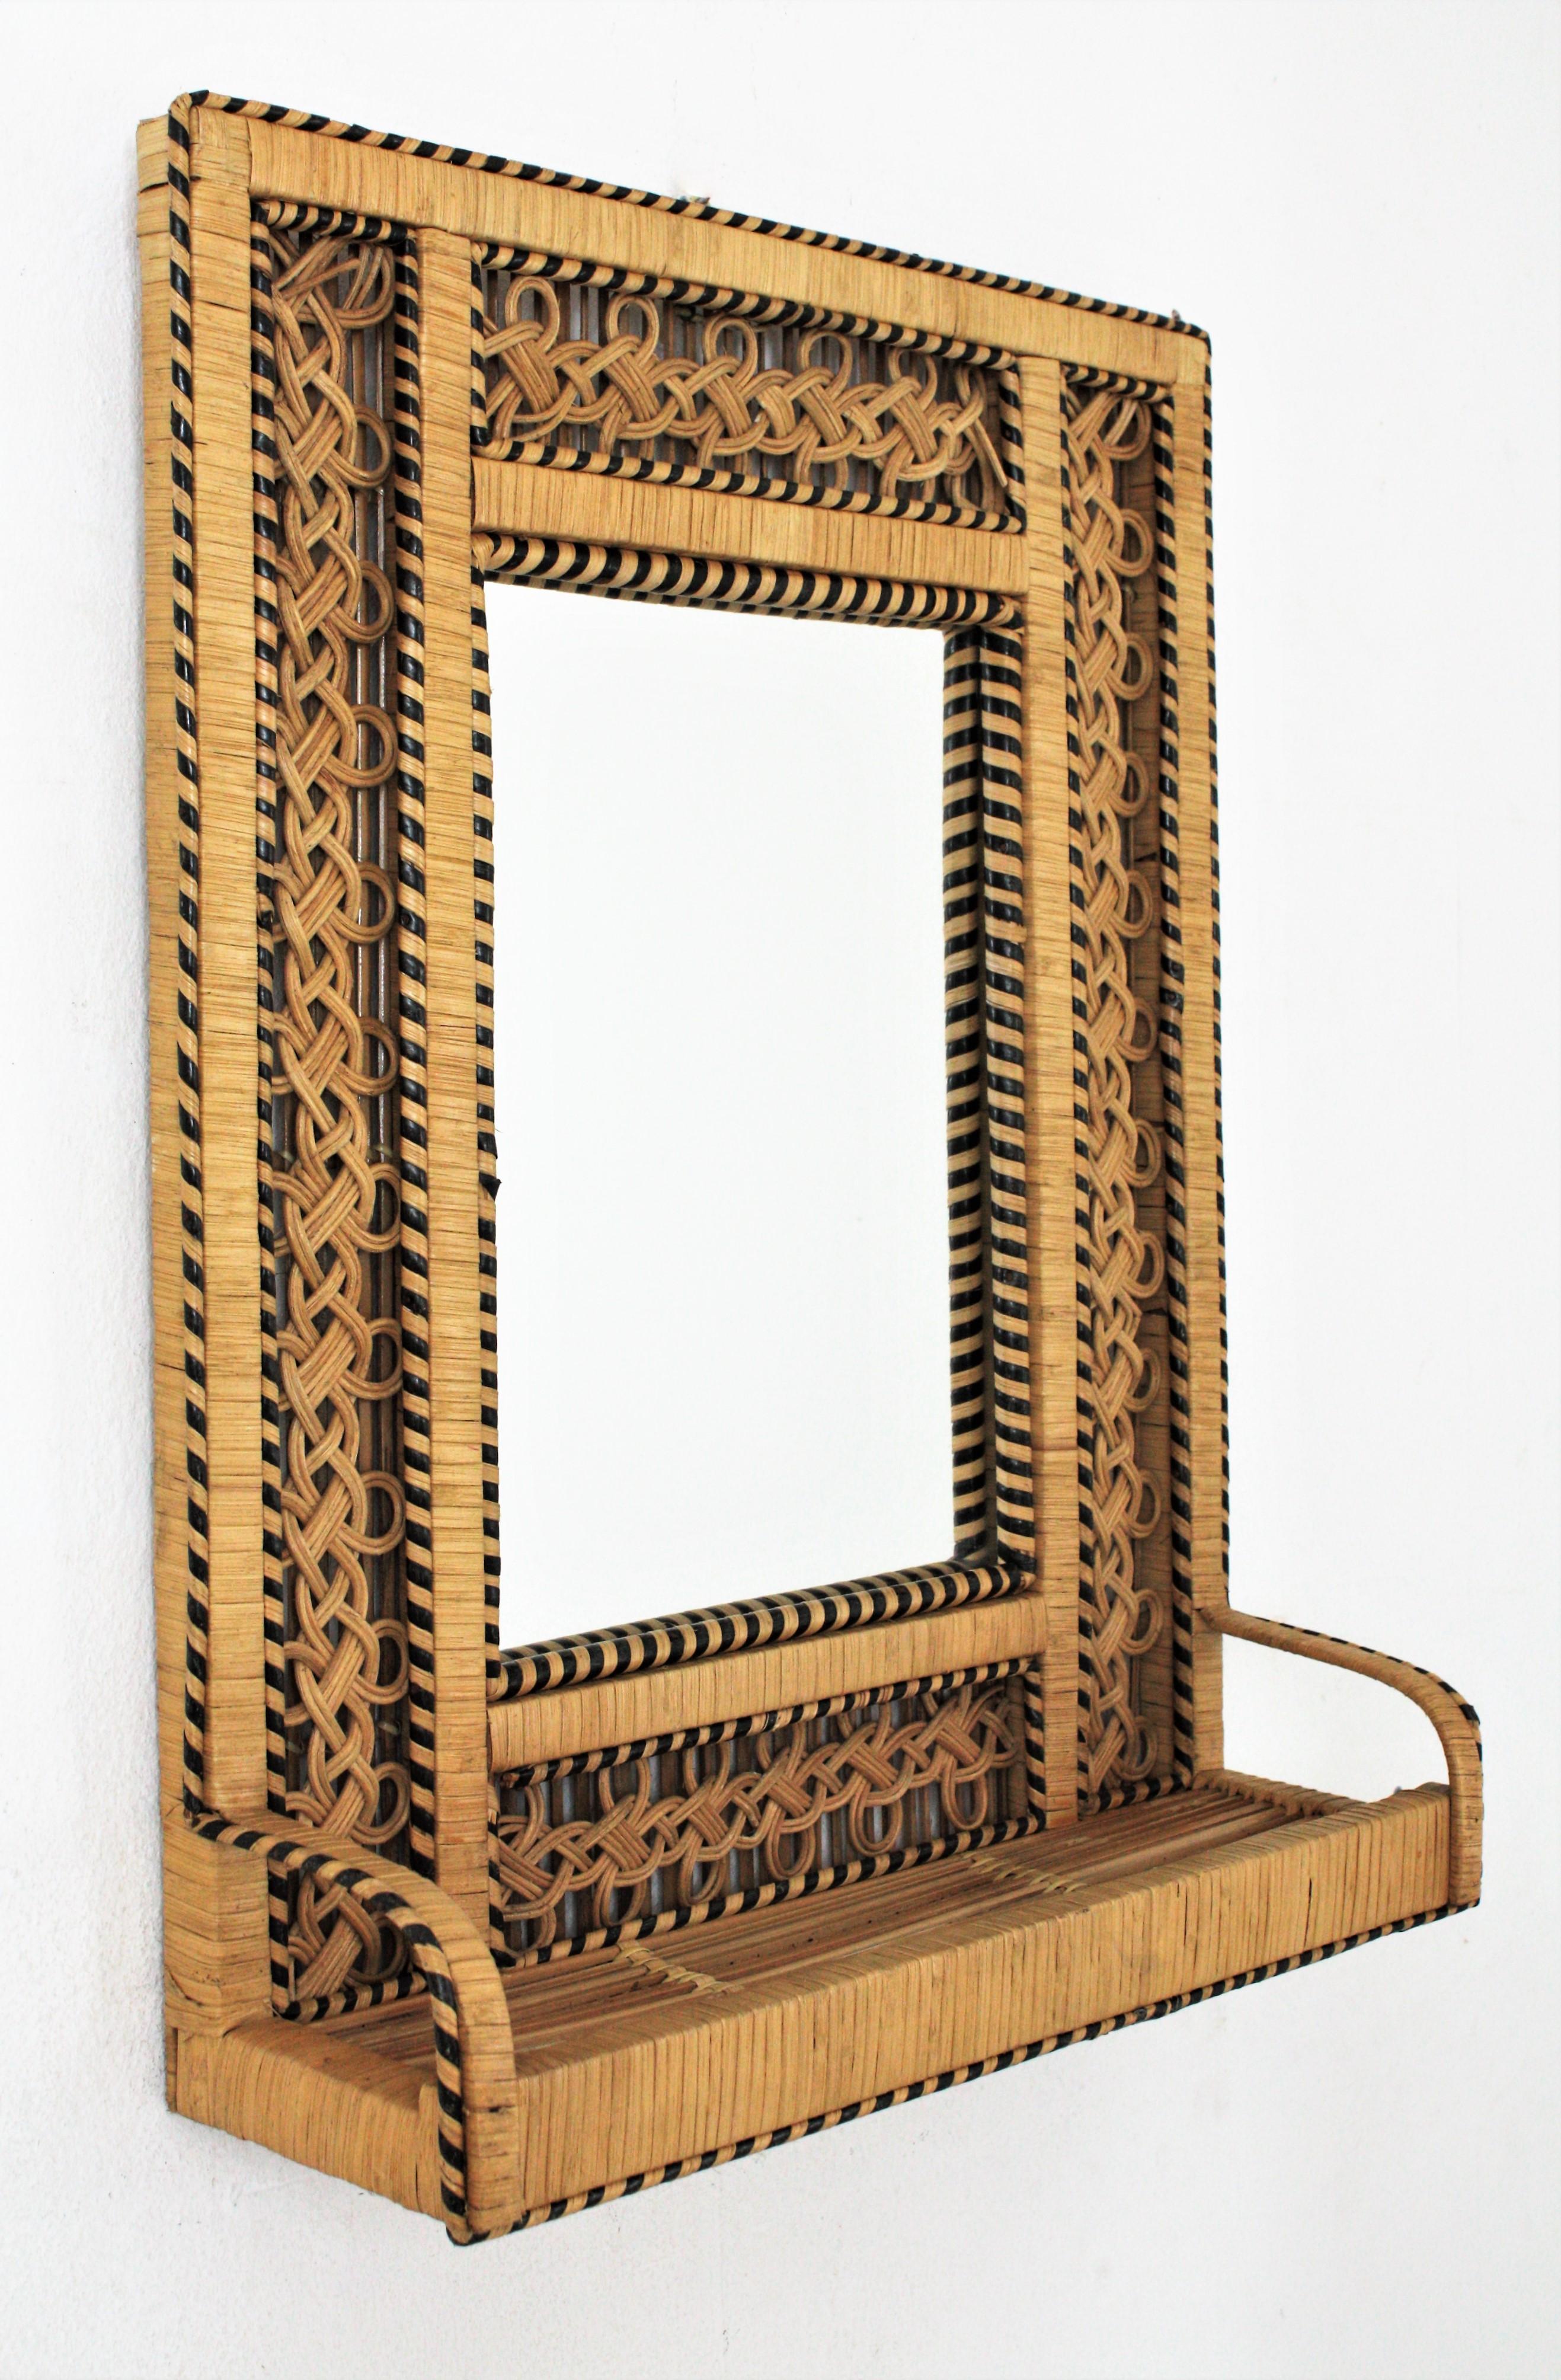 Details about   Small Rattan Wooden Mirror Retro Cane Sunburst Eye Vintage Style Wall Hanging 